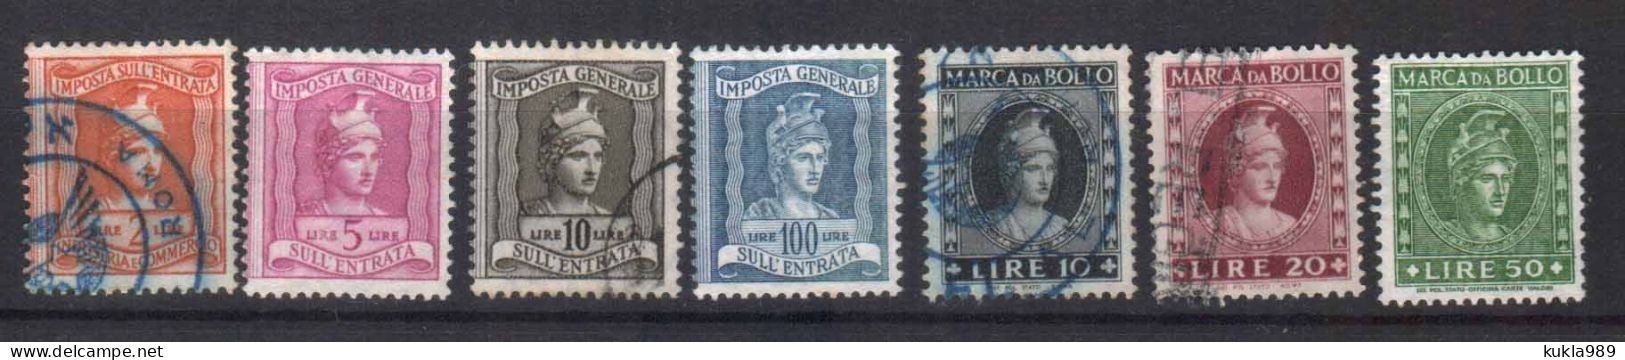 ITALY , C.1950s FISCAL REVENUE TAX 7 STAMPS - Revenue Stamps